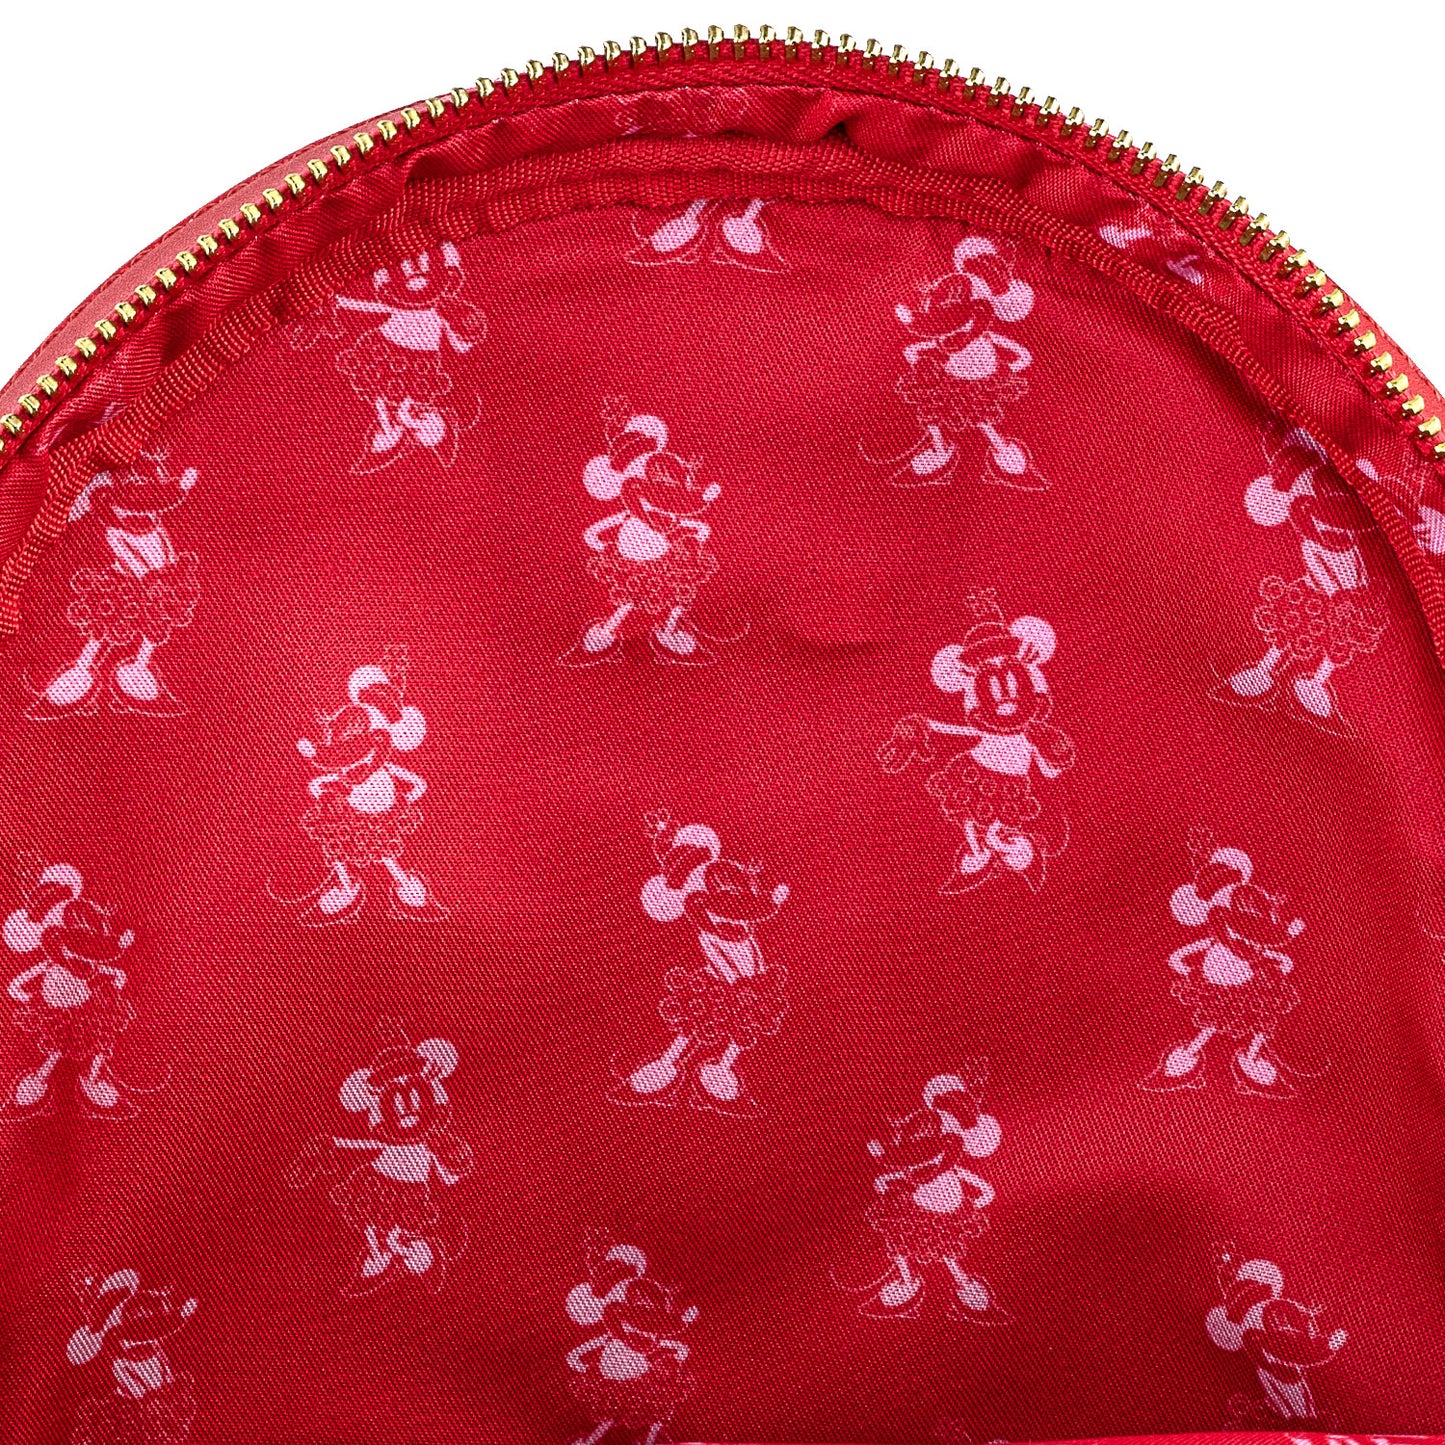 Loungefly x Disney Minnie Mouse Pink & Red Polka Dot Bow Mini Backpack